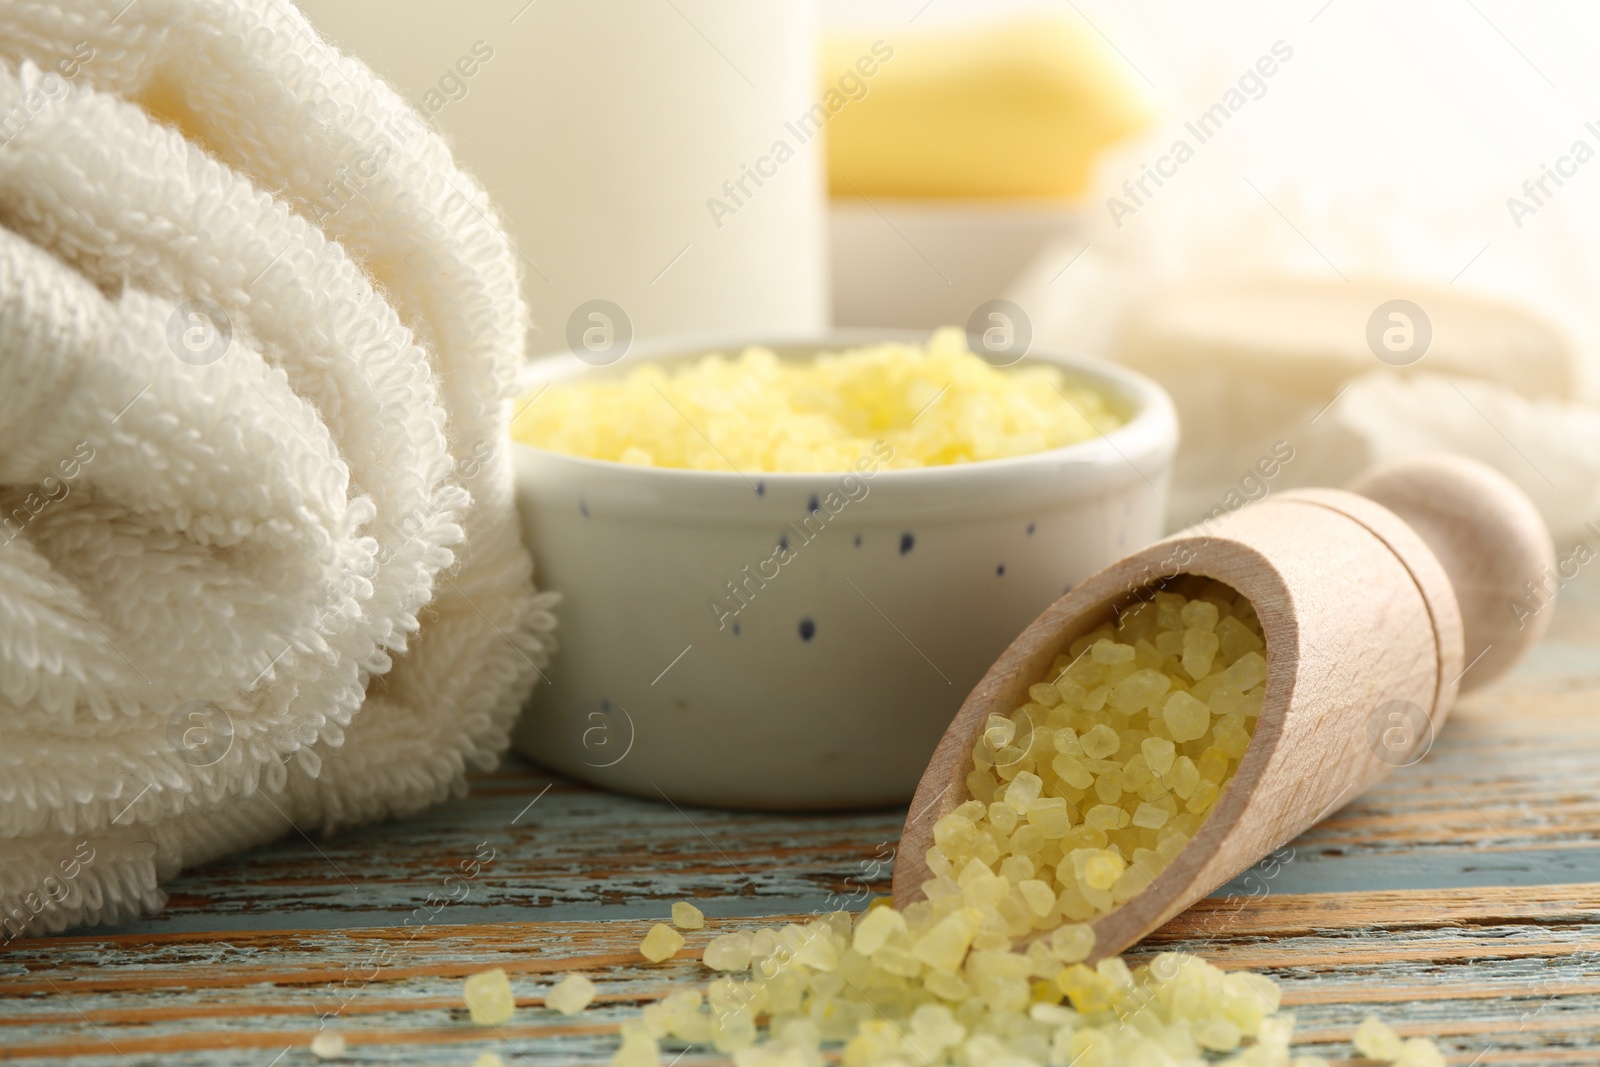 Photo of Wooden scoop of yellow sea salt and towel on rustic table, closeup